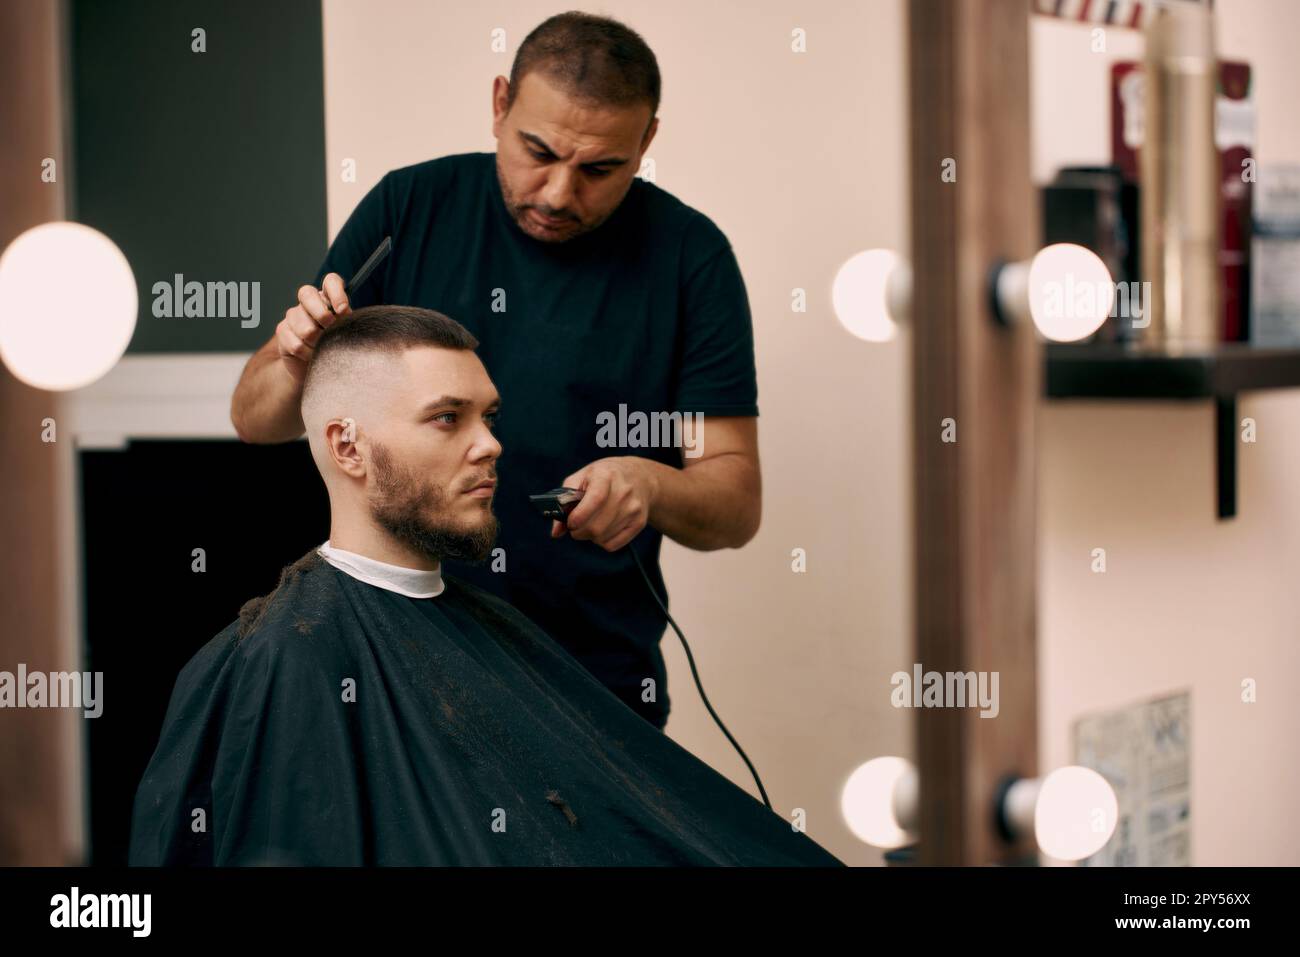 hairdresser does hairstyle with scissors in barber shop Stock Photo